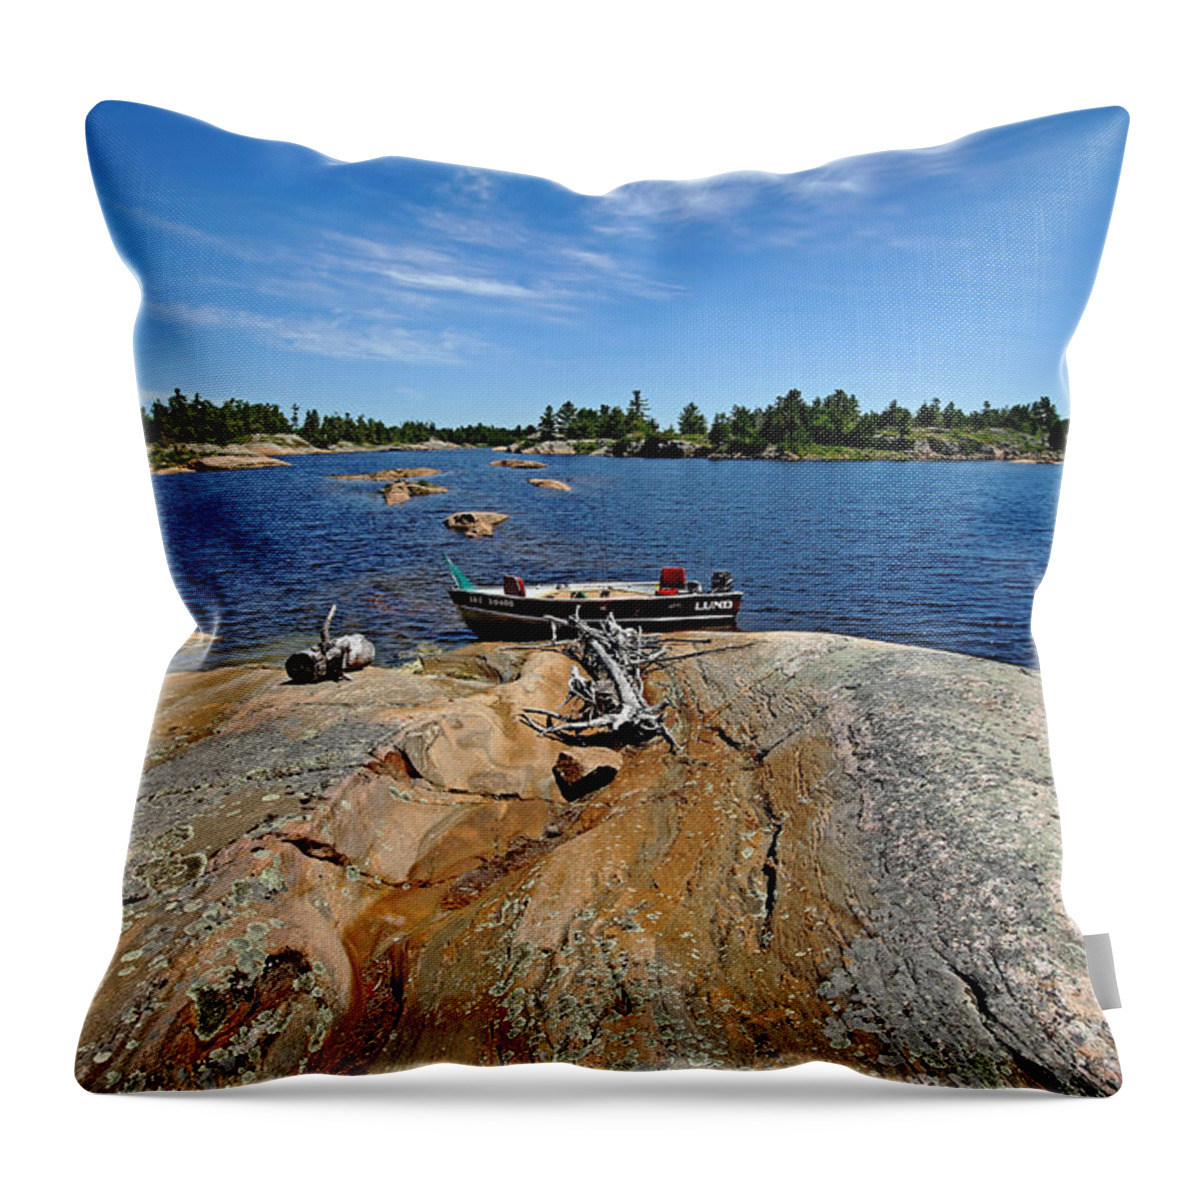 Georgian Bay Throw Pillow featuring the photograph Gone Exploring by Debbie Oppermann